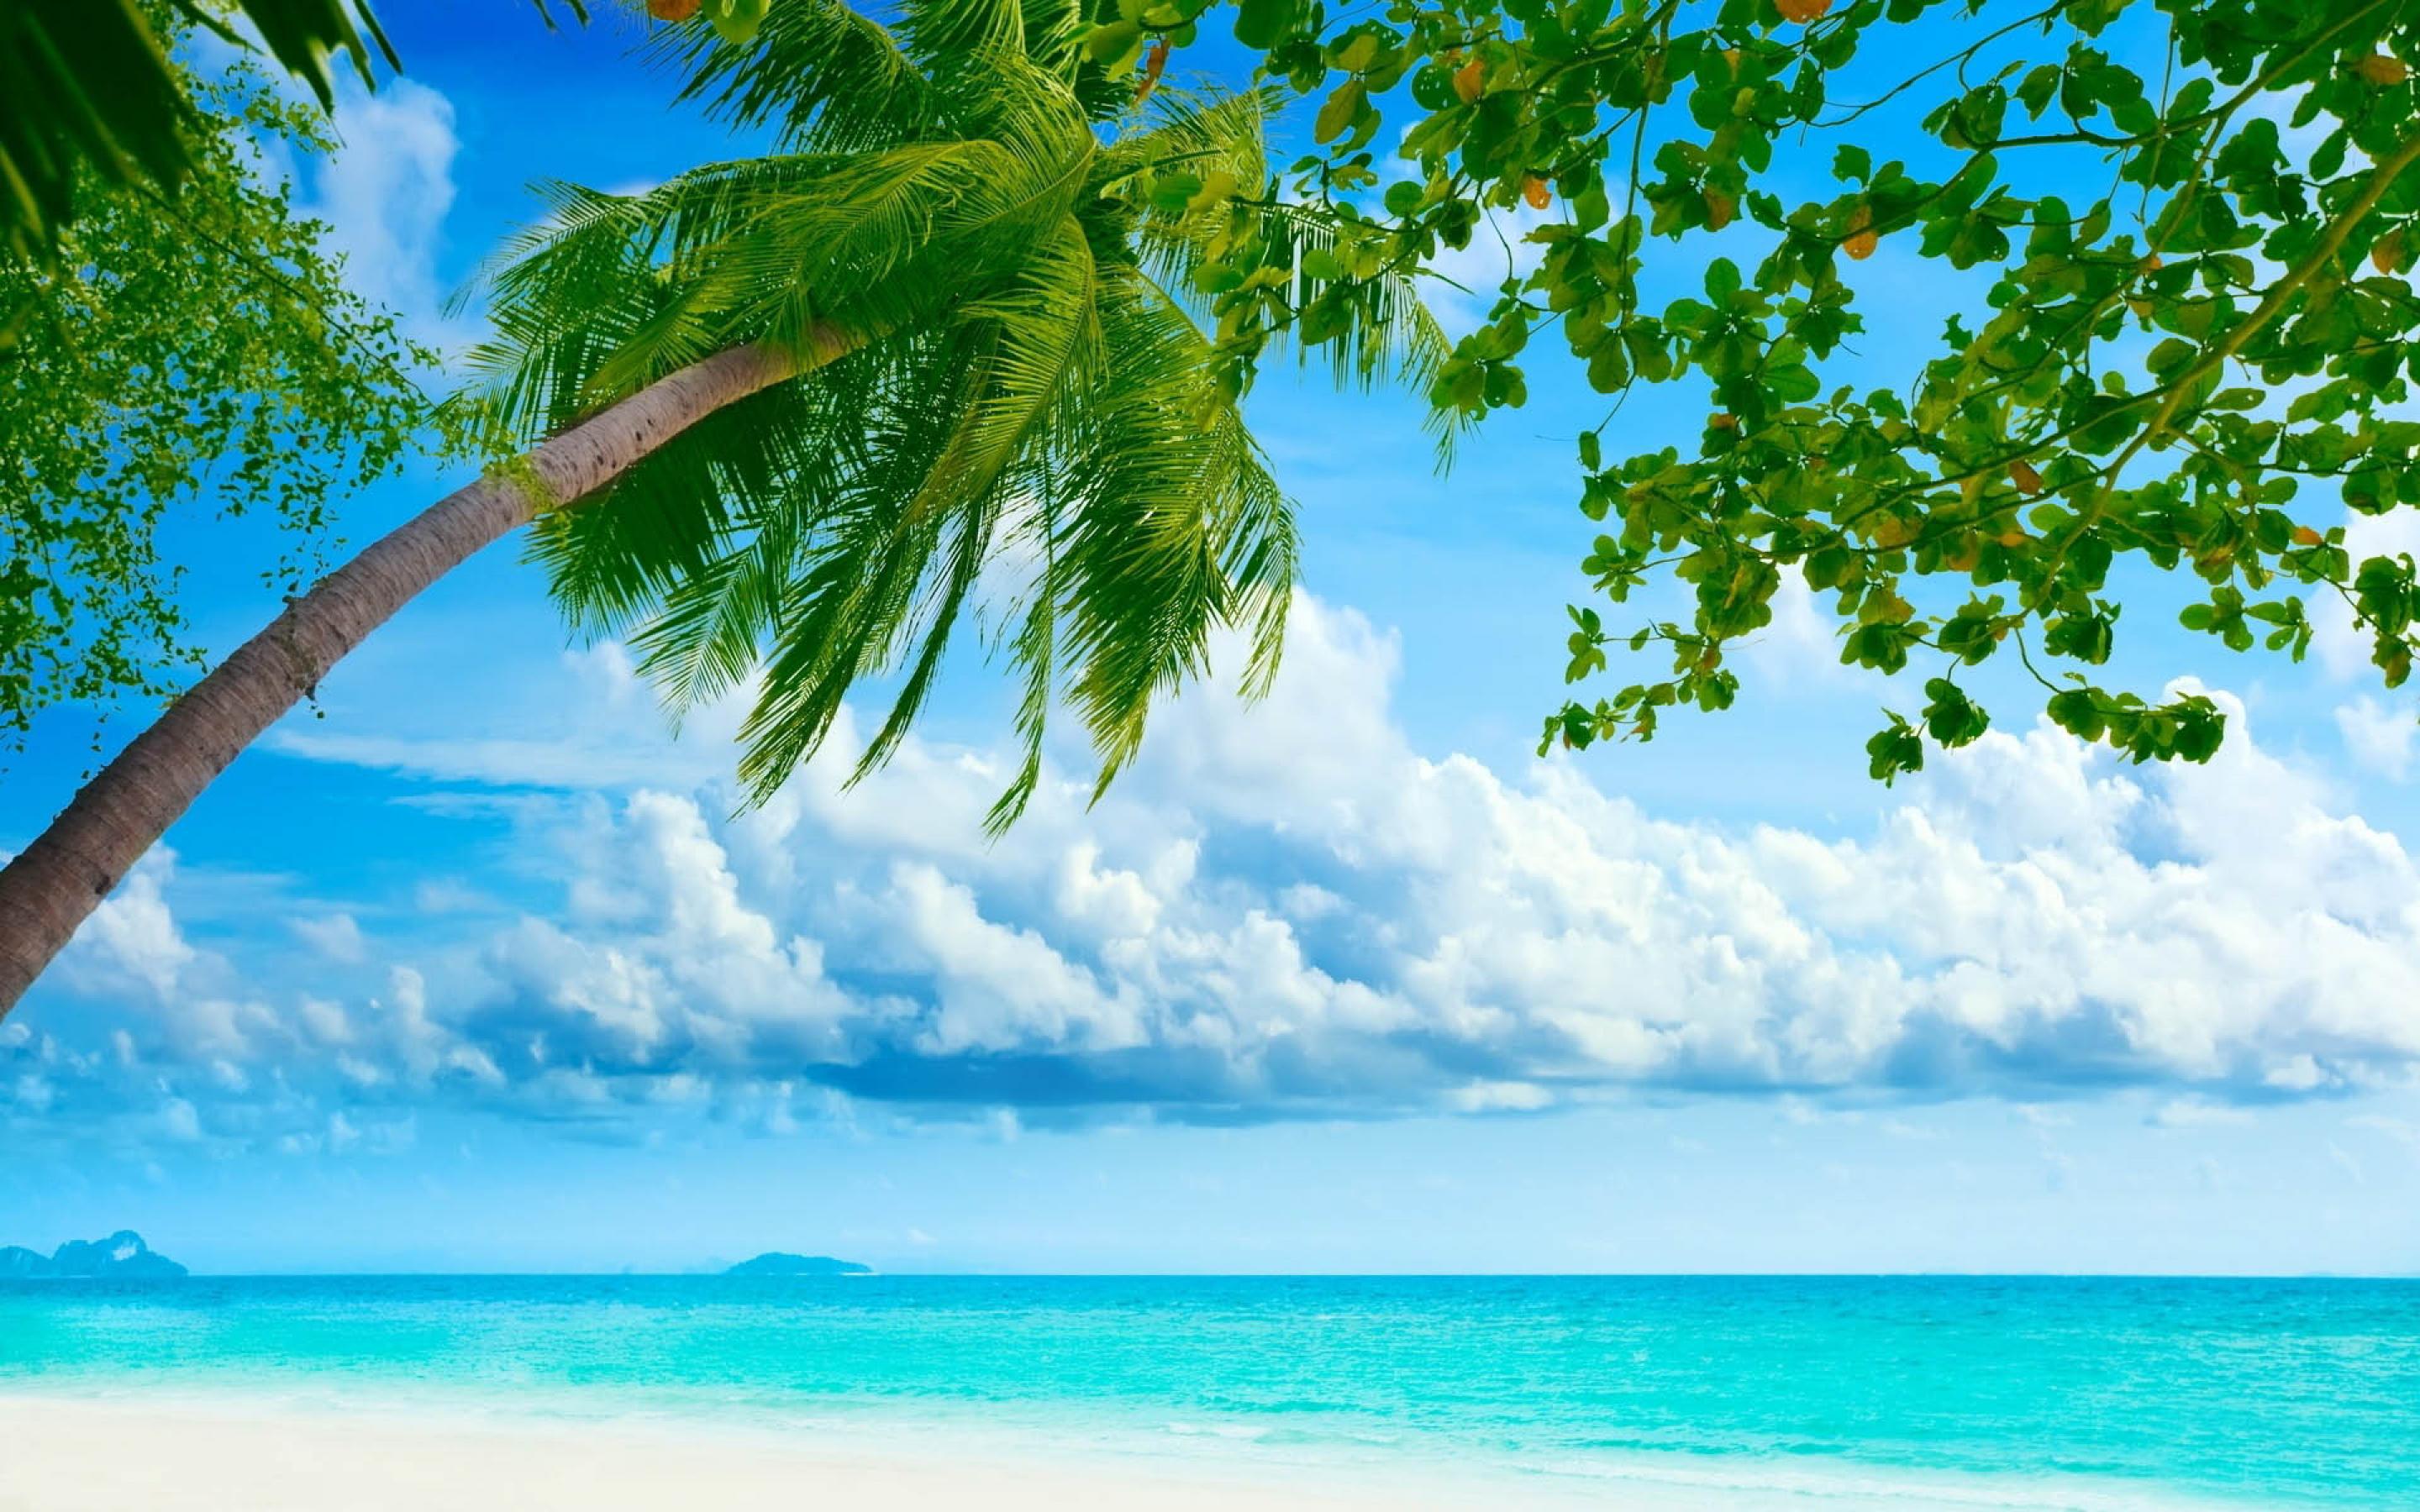 Beach at the blue ocean wallpapers and images - wallpapers, pictures, photos